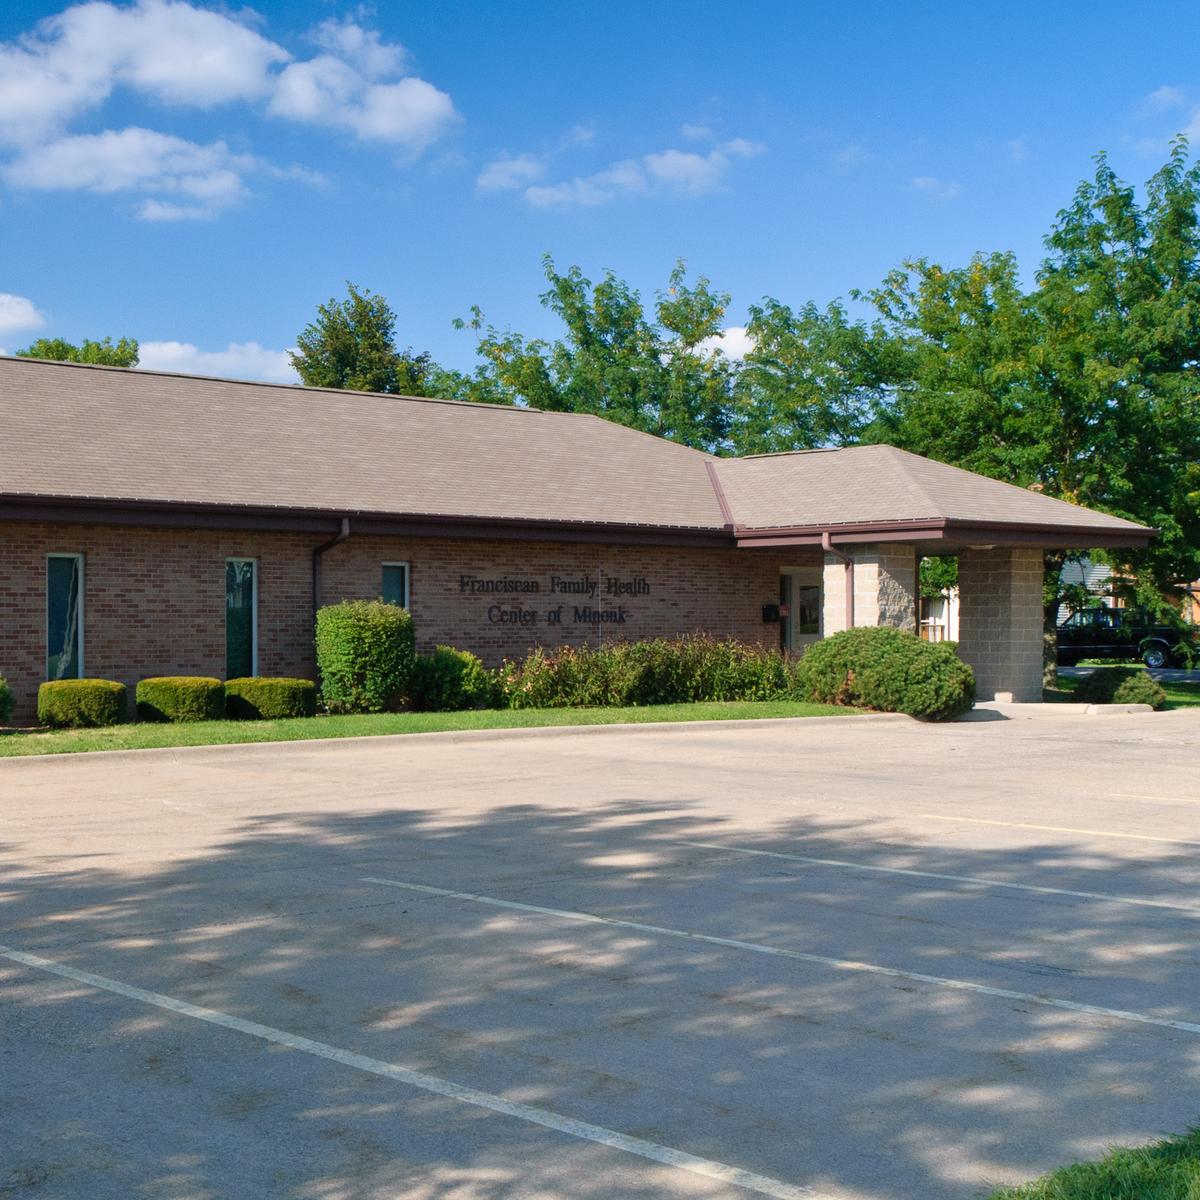 OSF Medical Group - Primary Care, 120 E. 7th Street, Minonk, Illinois, 61760